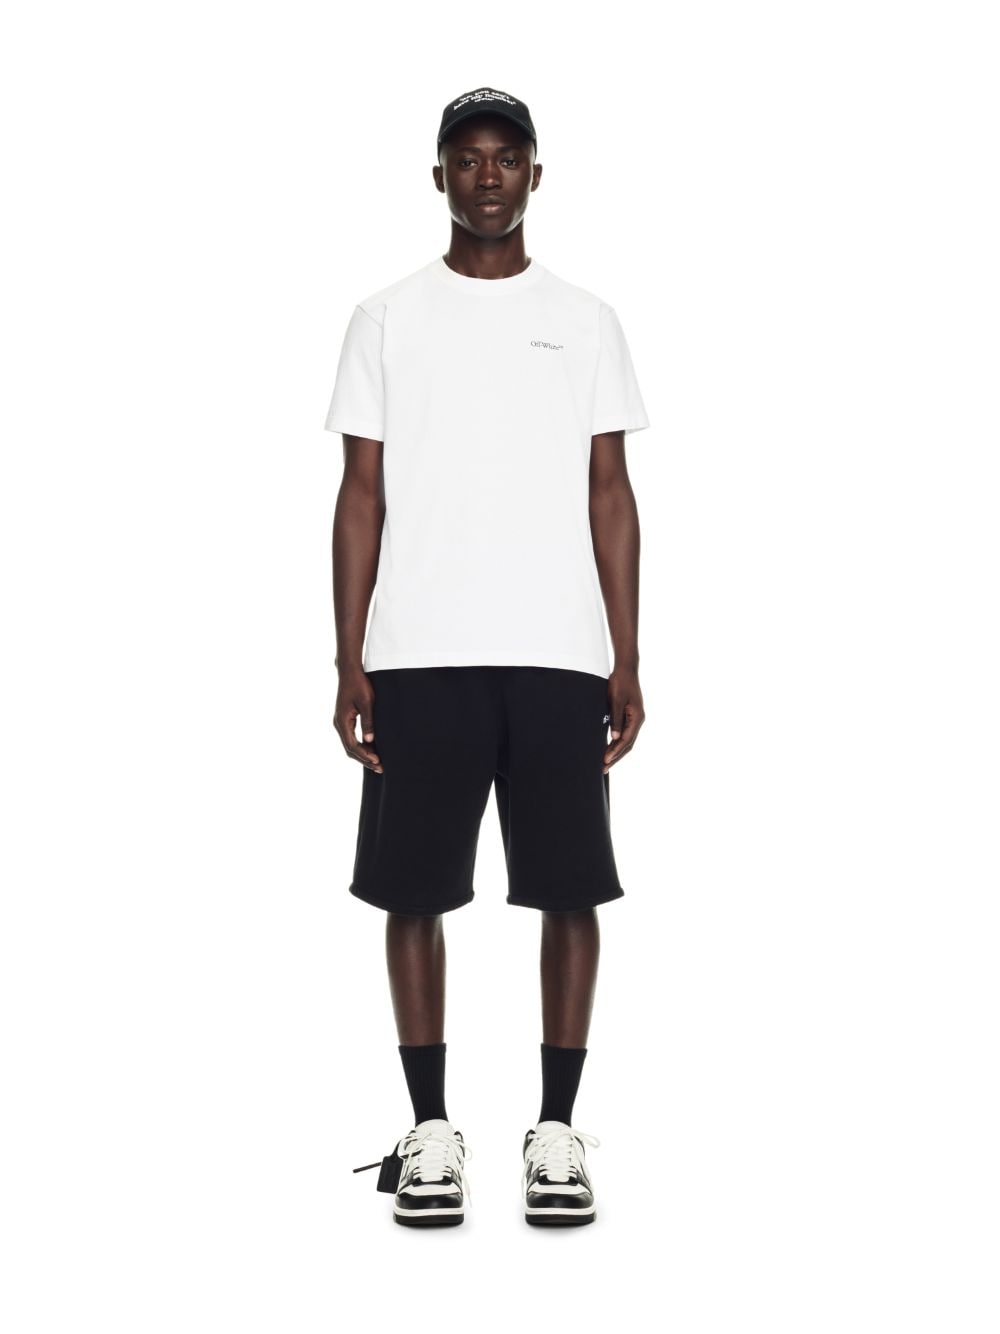 FLOWER SCAN ARR SLIM S/S TEE in white | Off-White™ Official BH